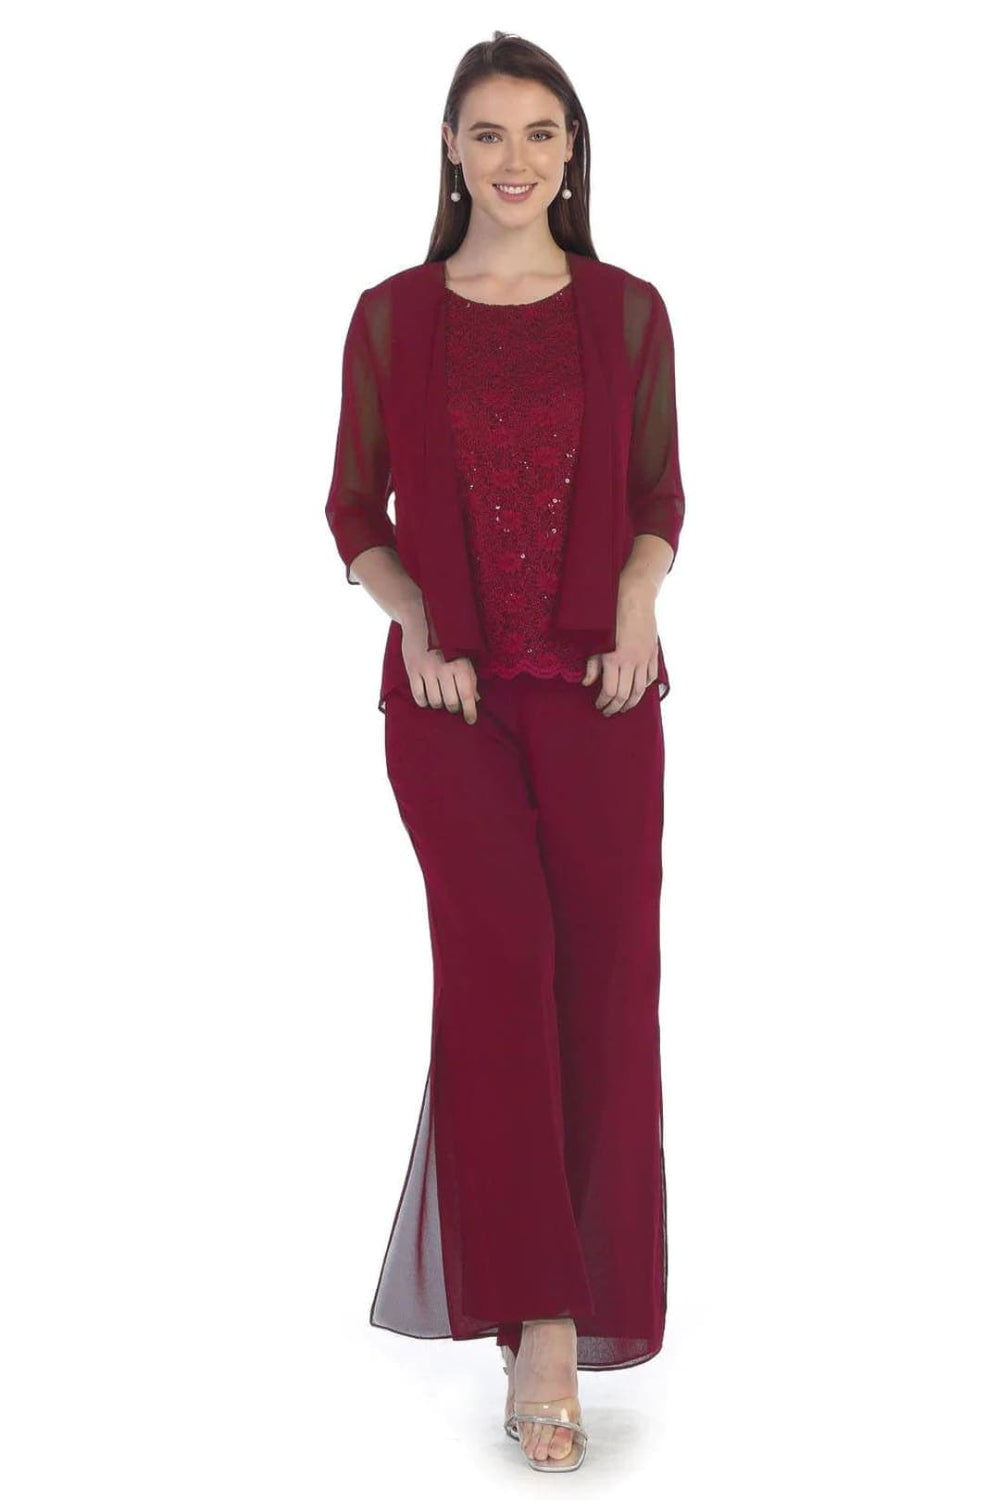 Silver Mother of the Bride Pant Suit for $129.99 – The Dress Outlet